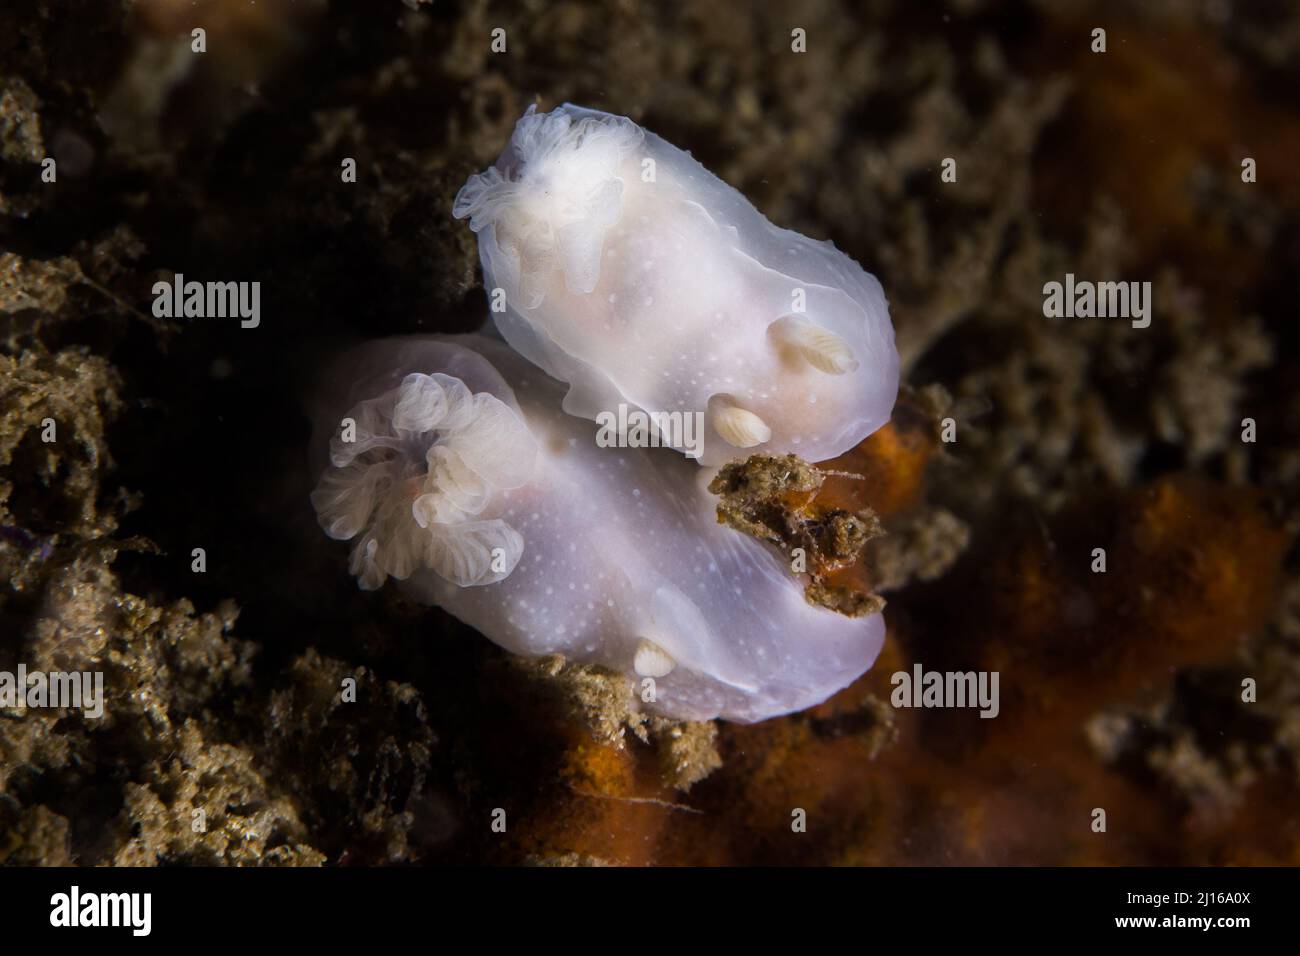 Two Ghost nudibranchs underwater next to each other, a tiny sea slug with white to translucent body Stock Photo